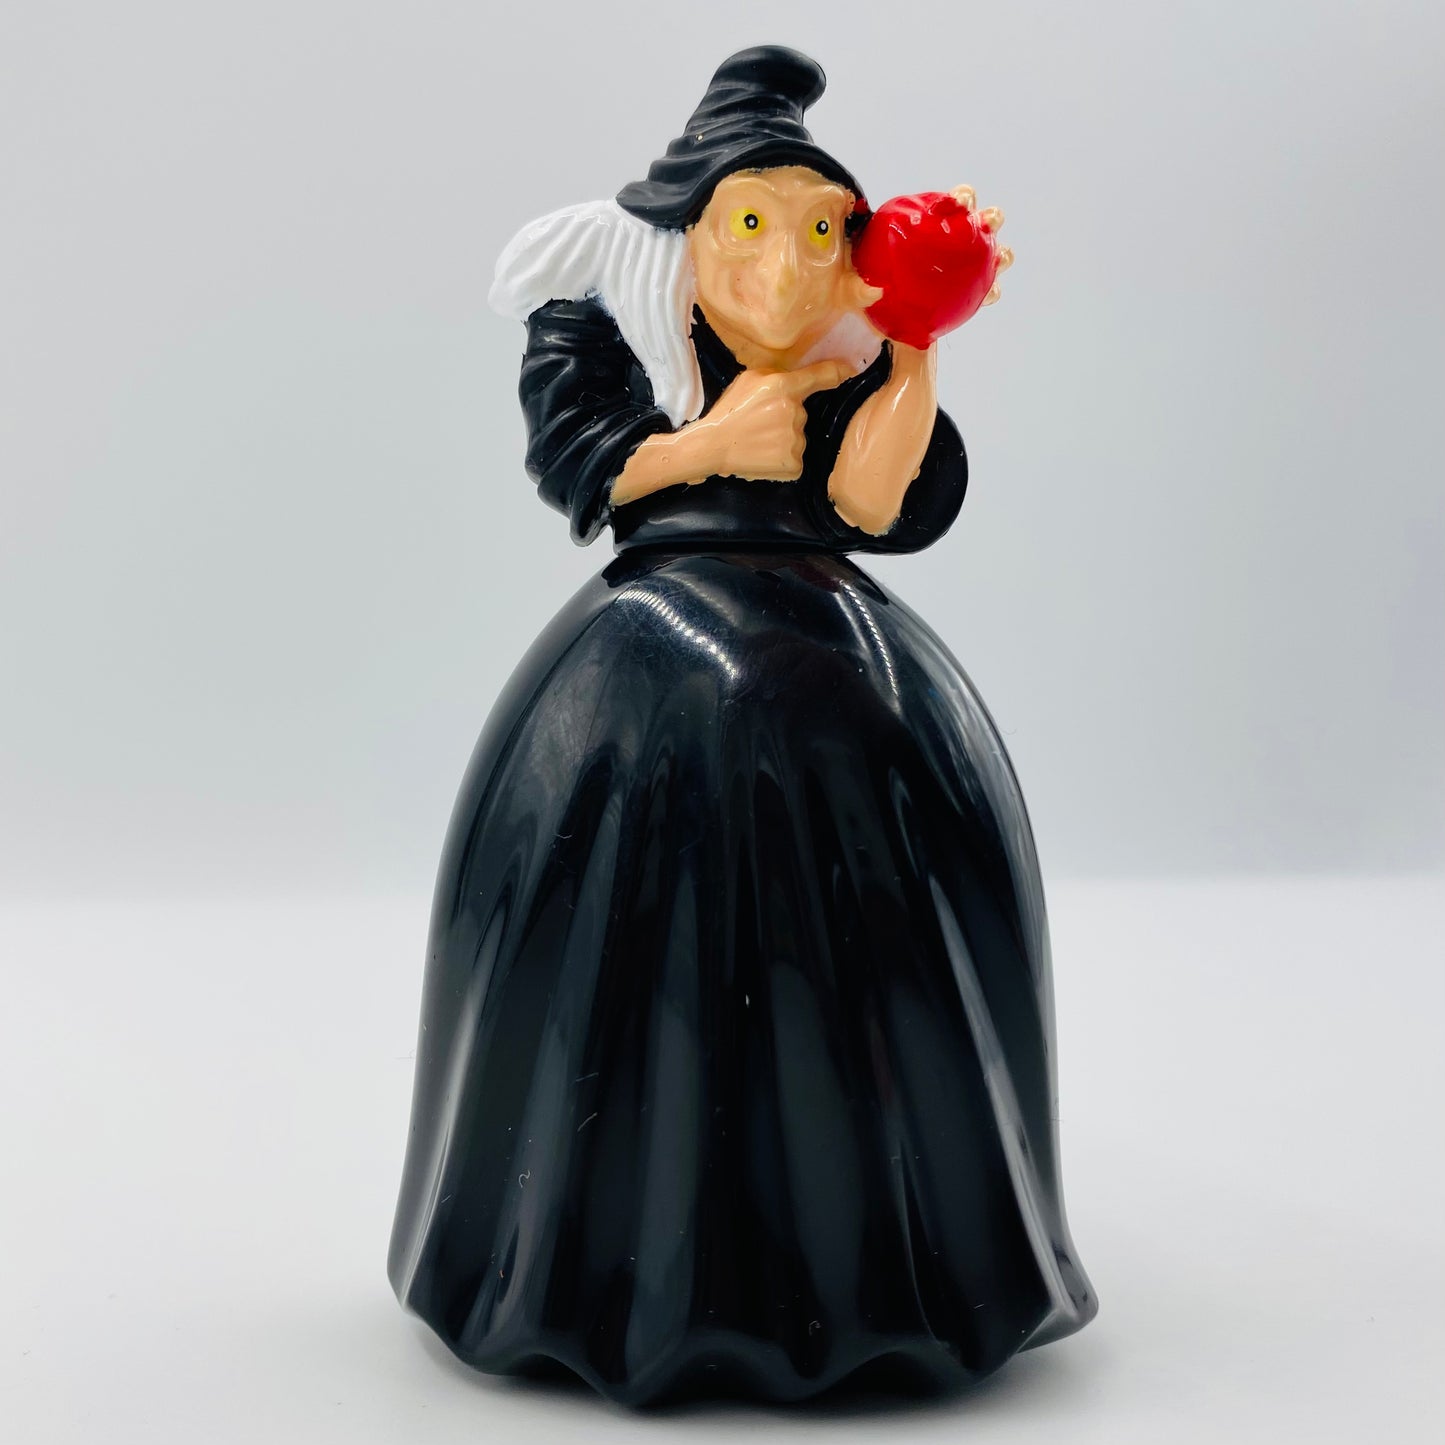 Snow White and the Seven Dwarfs Double Trouble Queen/Witch McDonald's Happy Meal toy (1992) loose